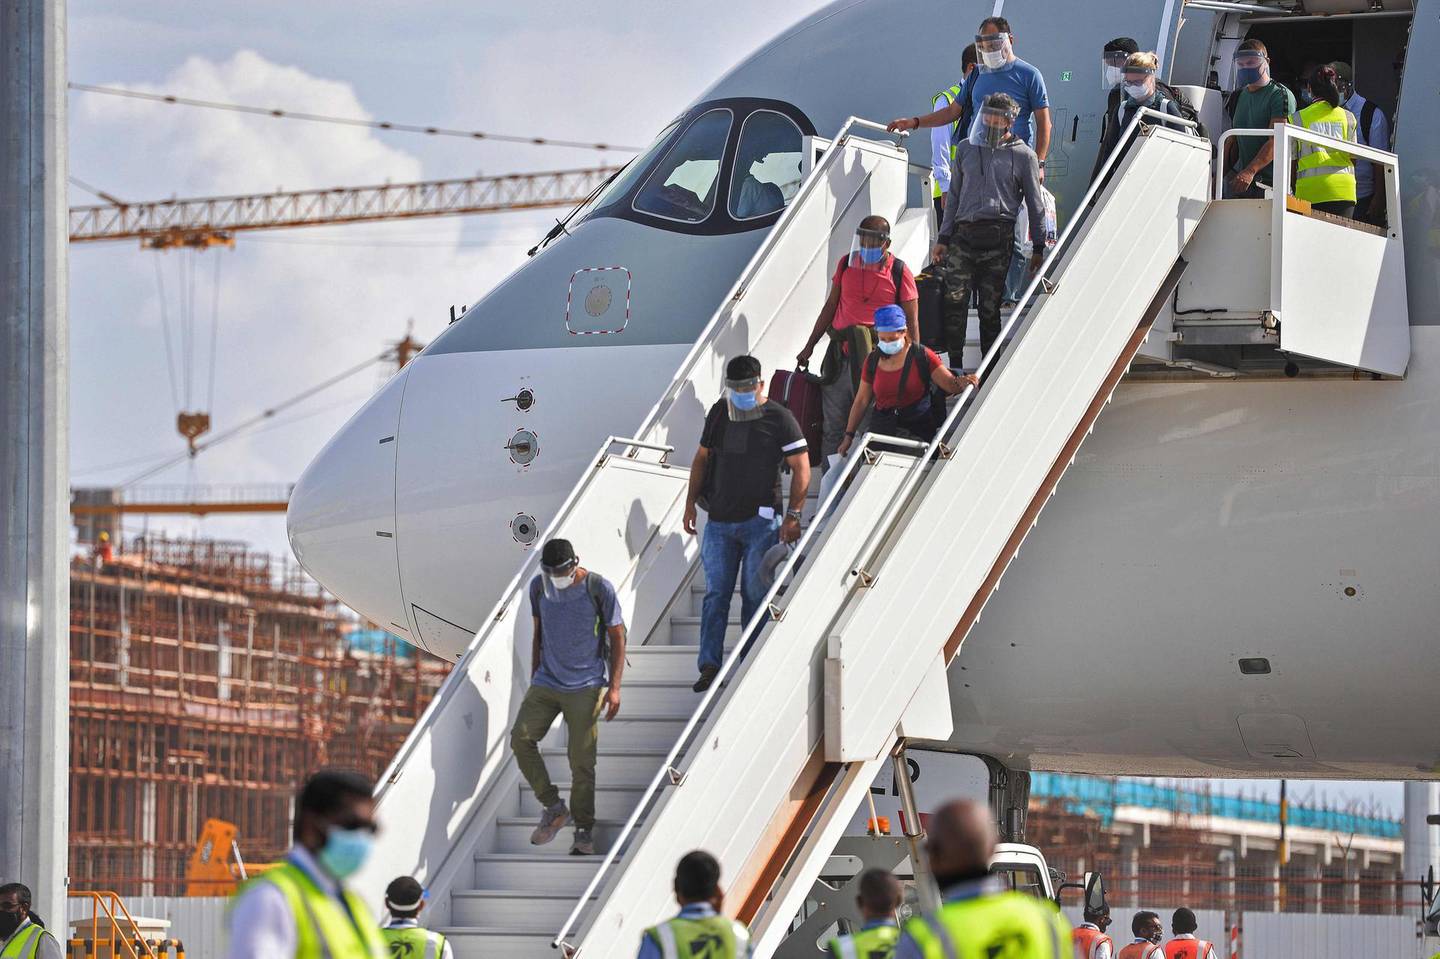 Passengers disembark from a Qatar Airways aircraft upon their arrival at the Velana International Airport in Male on July 15, 2020. The Maldives formally reopened for tourists on July 15 with a water salute for a commercial airliner bringing holiday makers to the upmarket destination where foreigners will get free coronavirus tests. / AFP / Ahmed SHURAU
